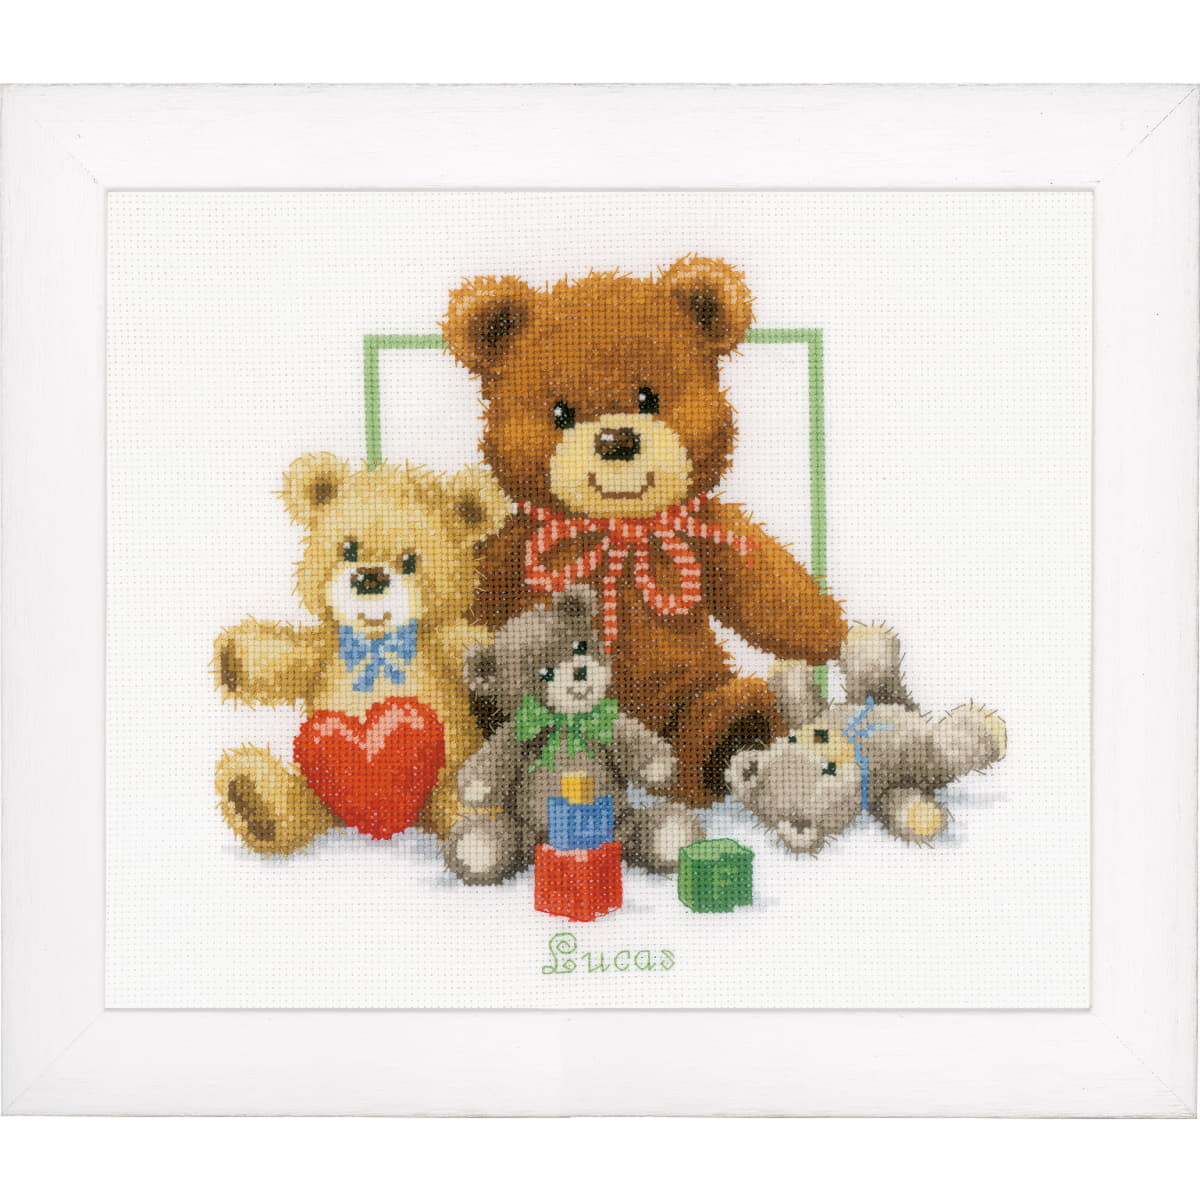 Vervaco counted cross stitch kit "Cuddly...